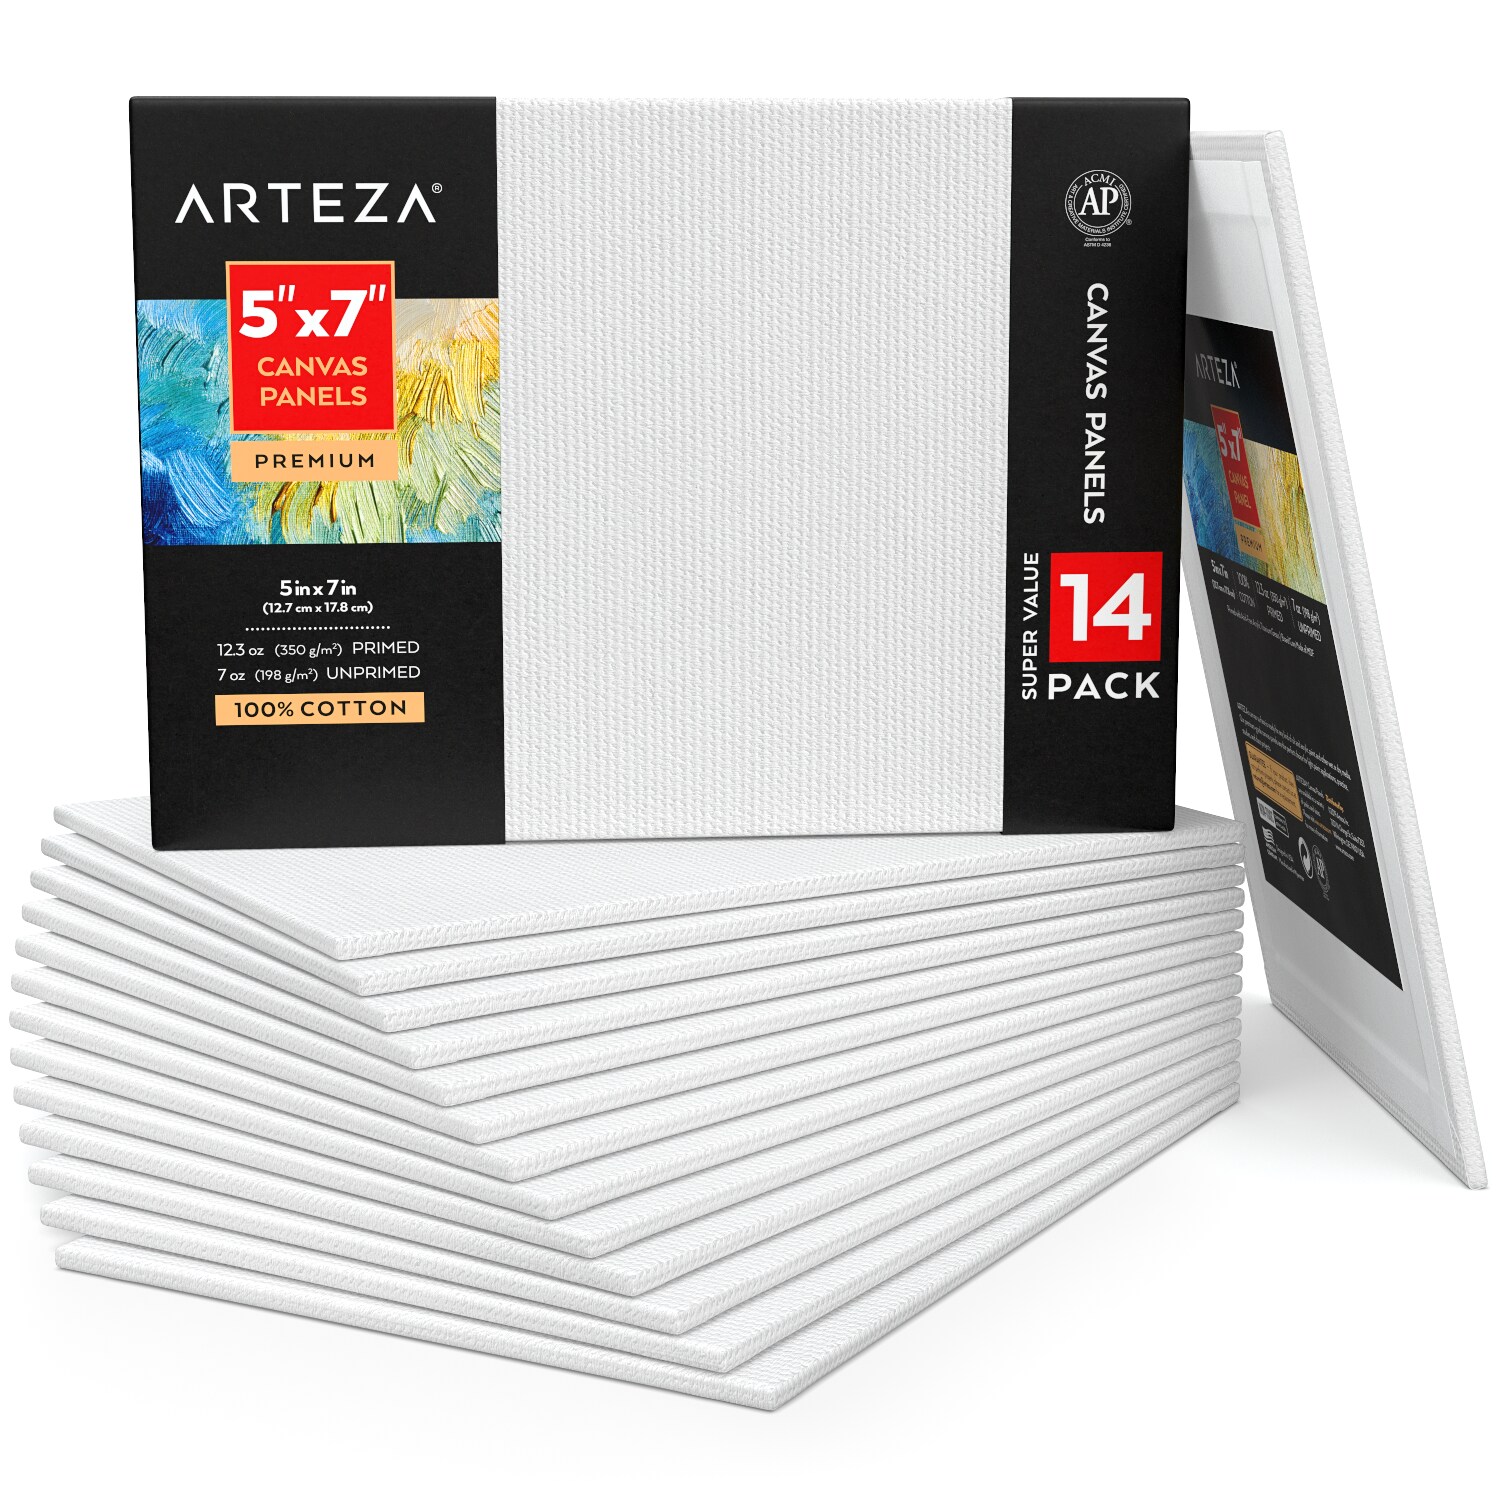 Artists canvas double primed acrylic blank canvas oil paint boards white 